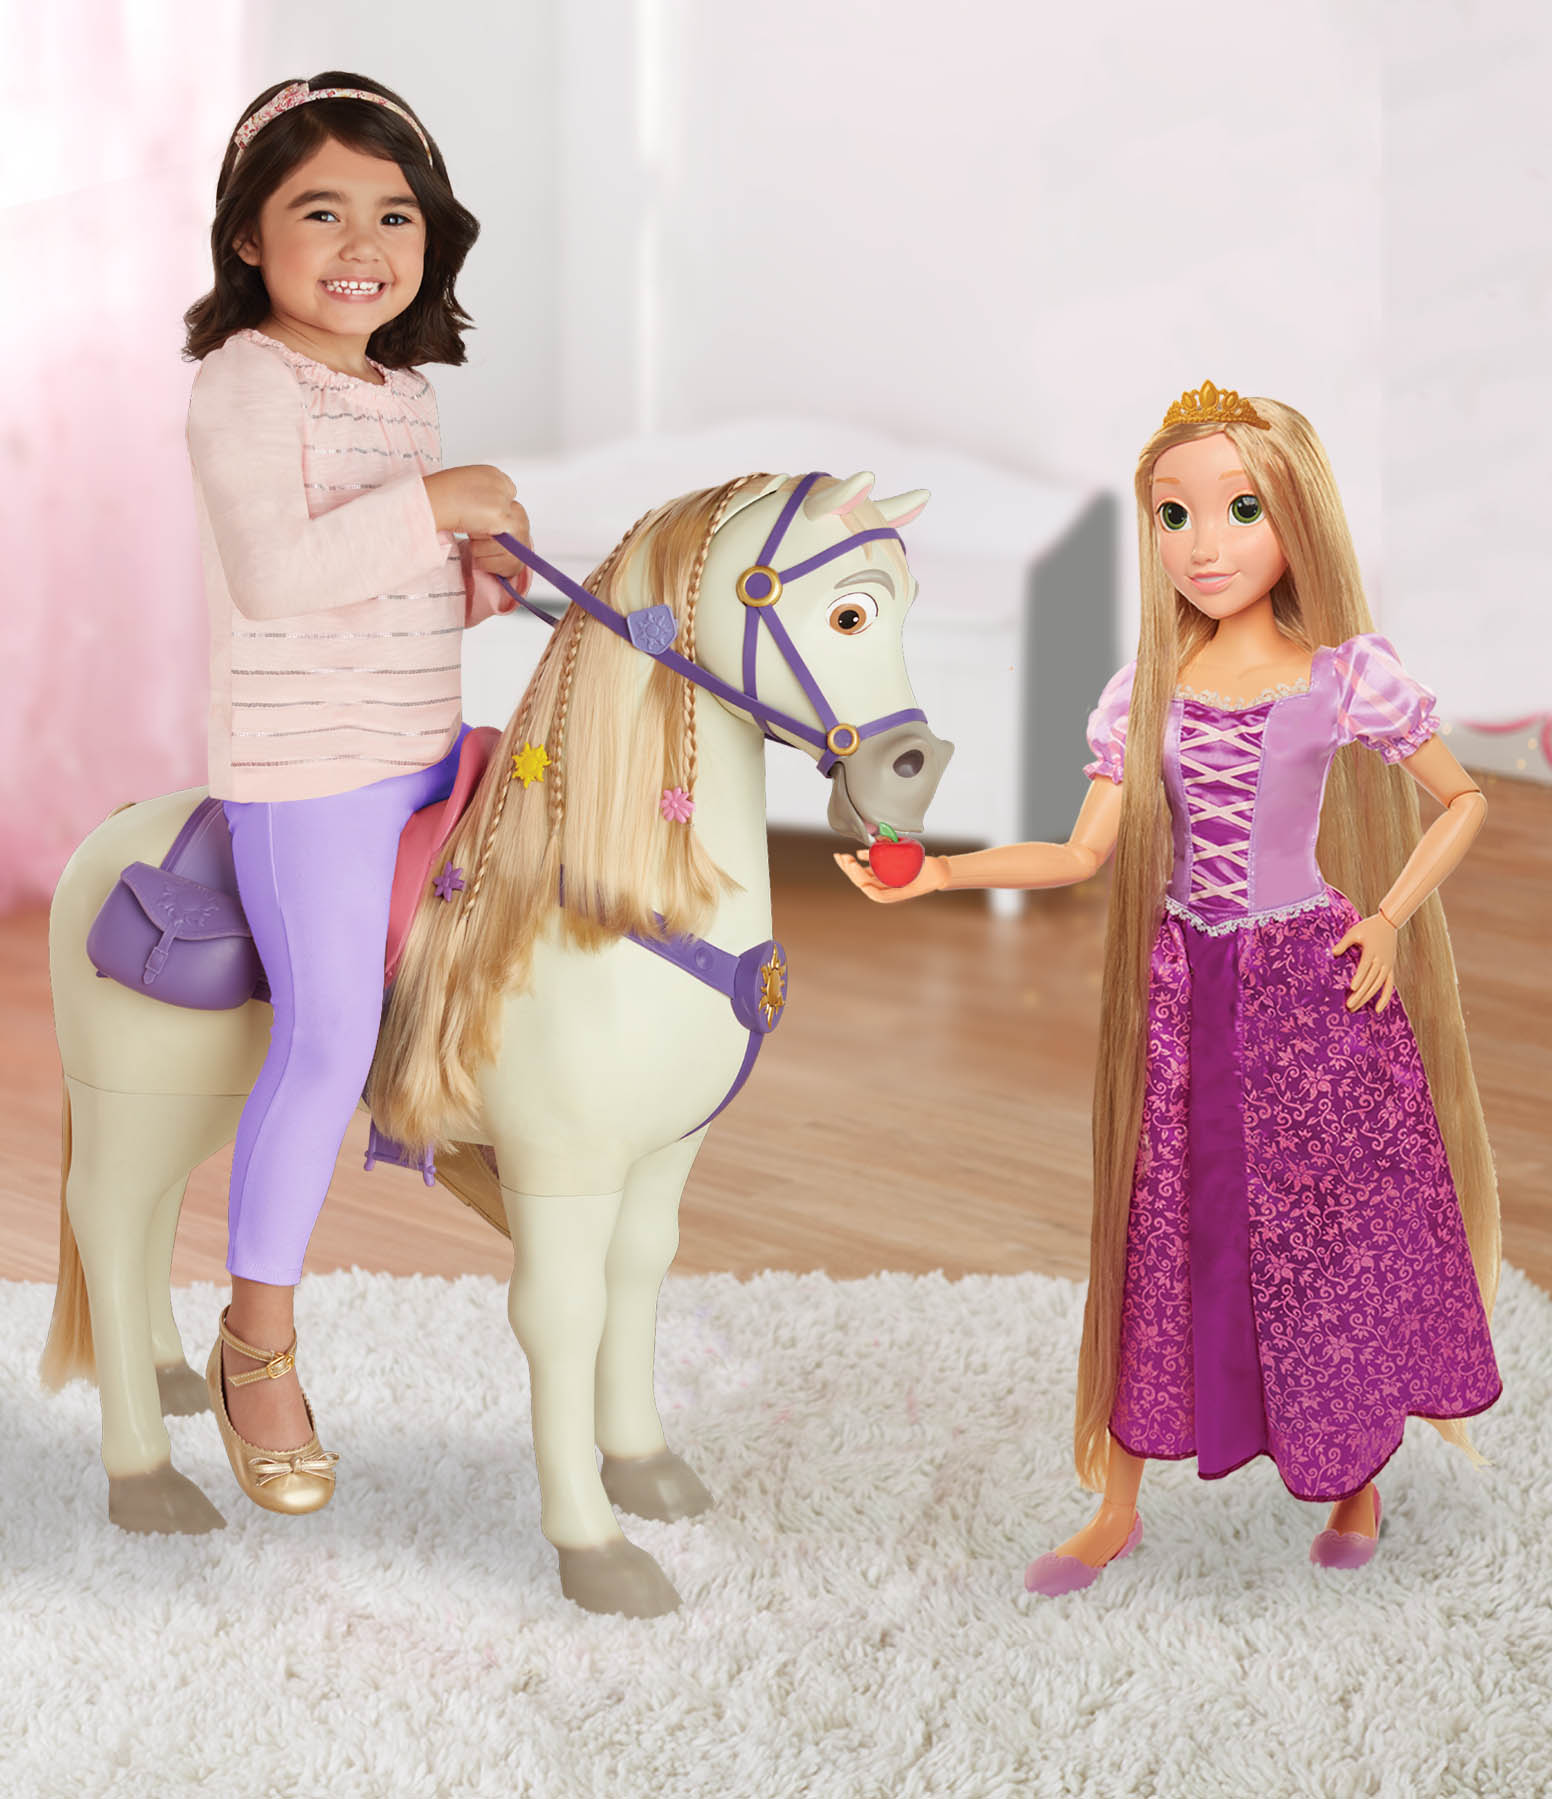 Disney Princess 32 inch Playdate Rapunzel Doll, for Children Ages 3+ - image 3 of 8